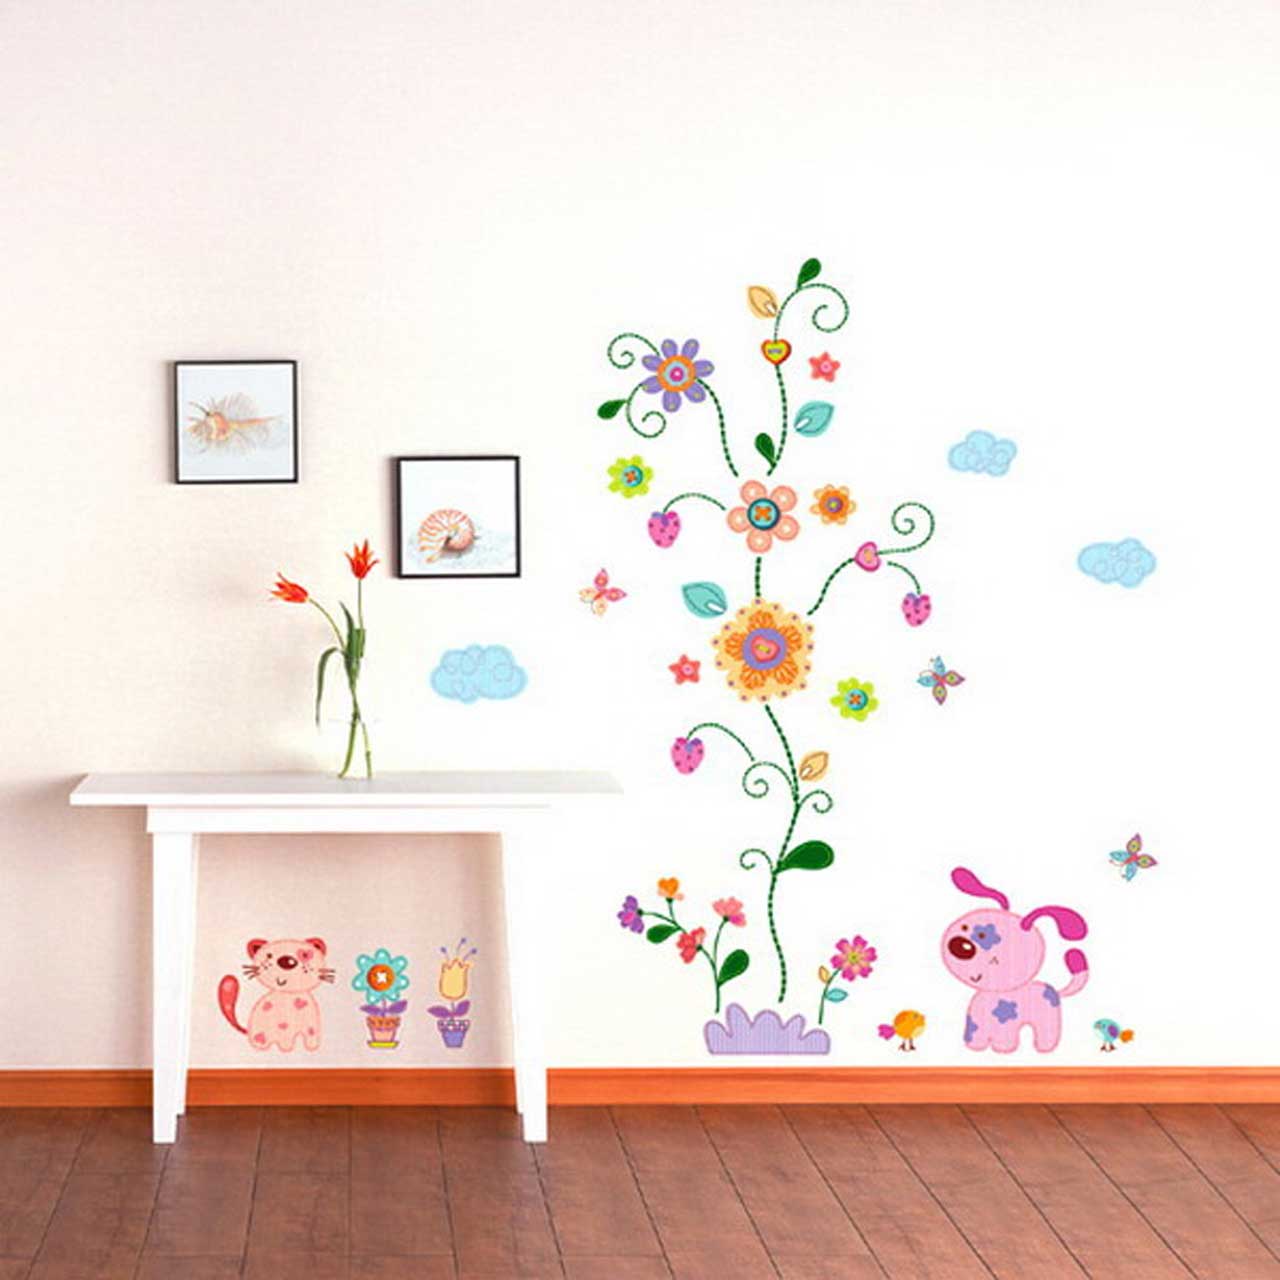 Beautiful Kids Room Decorating Design Ideas With Creative Removable Flower Wall Art Kids Room Design Also Simple White Table For Playroom Kids Room Design